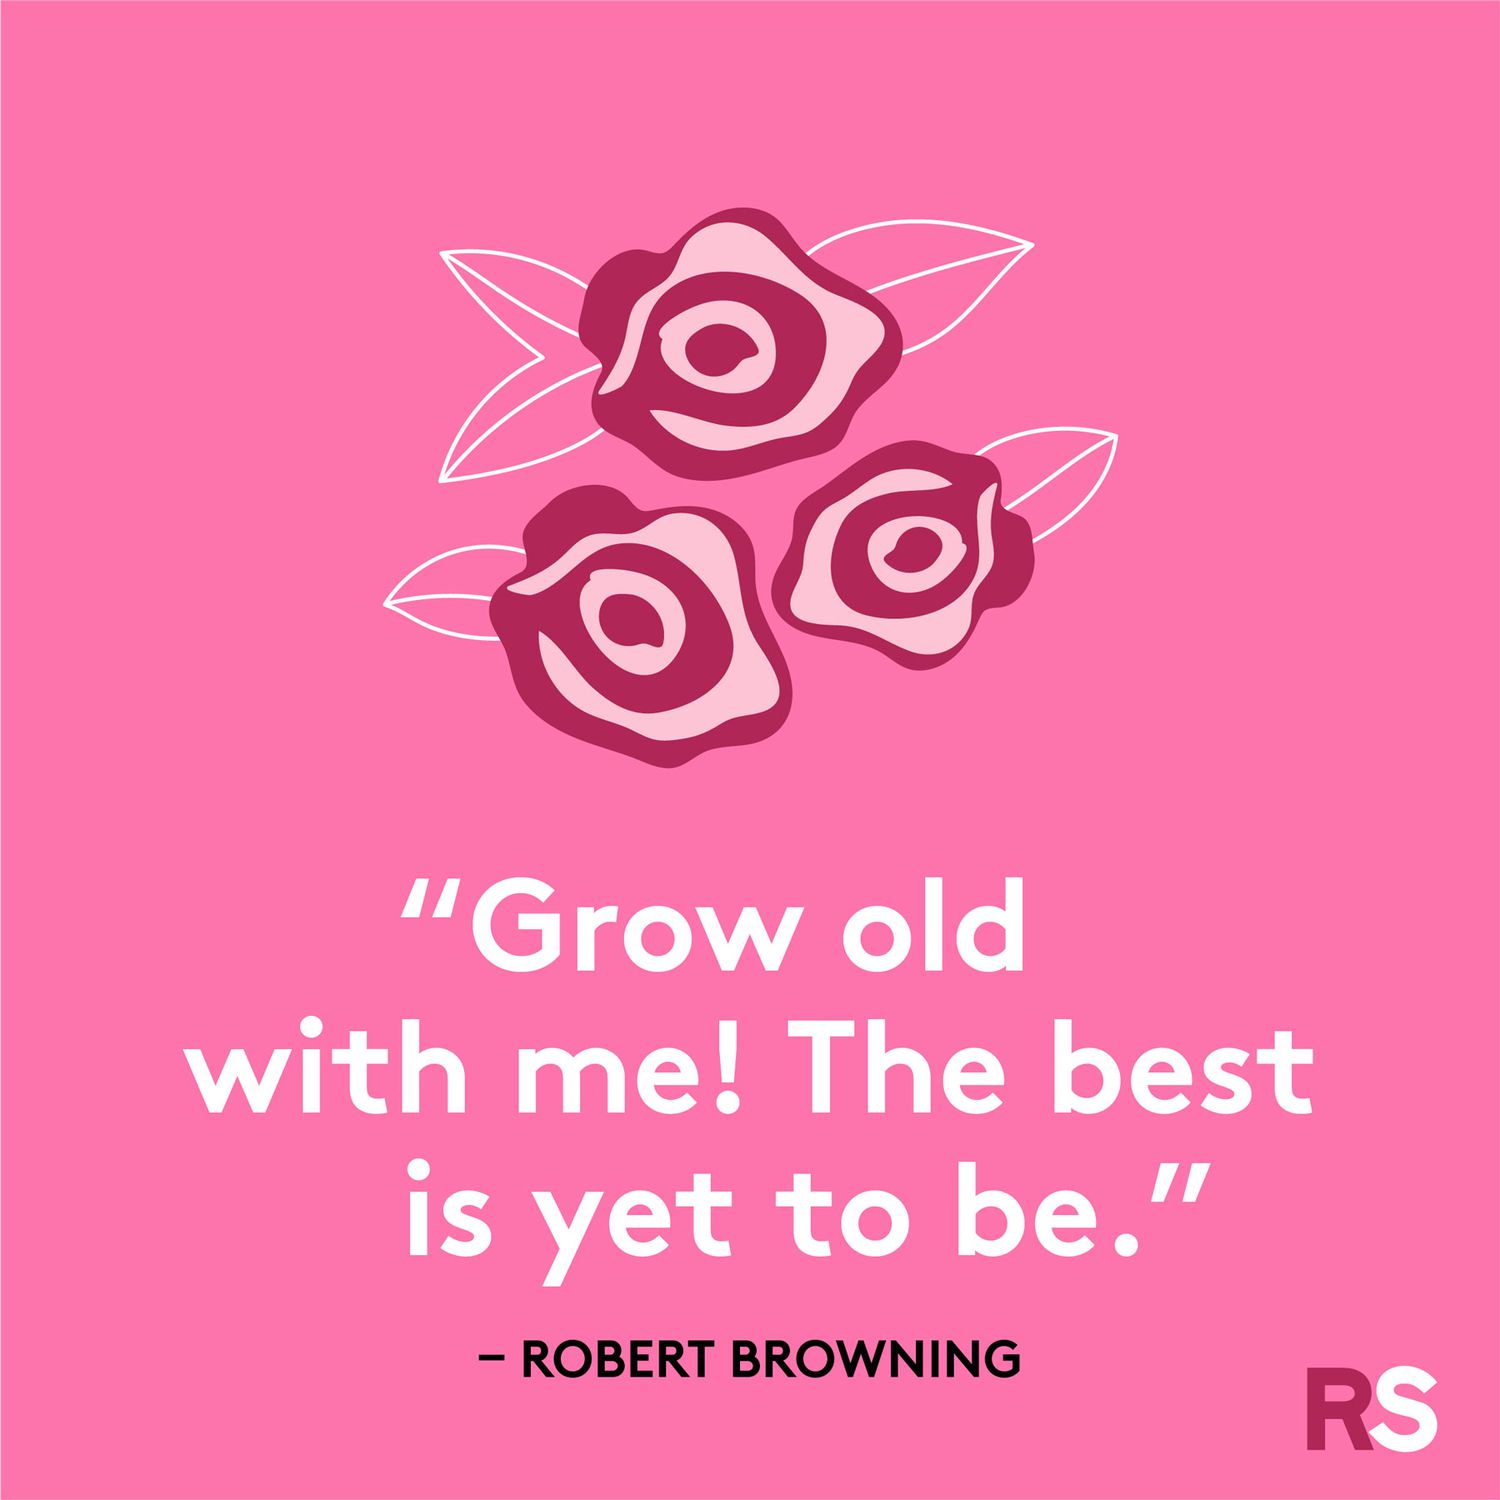 Love quotes, quotes about love - Robert Browning